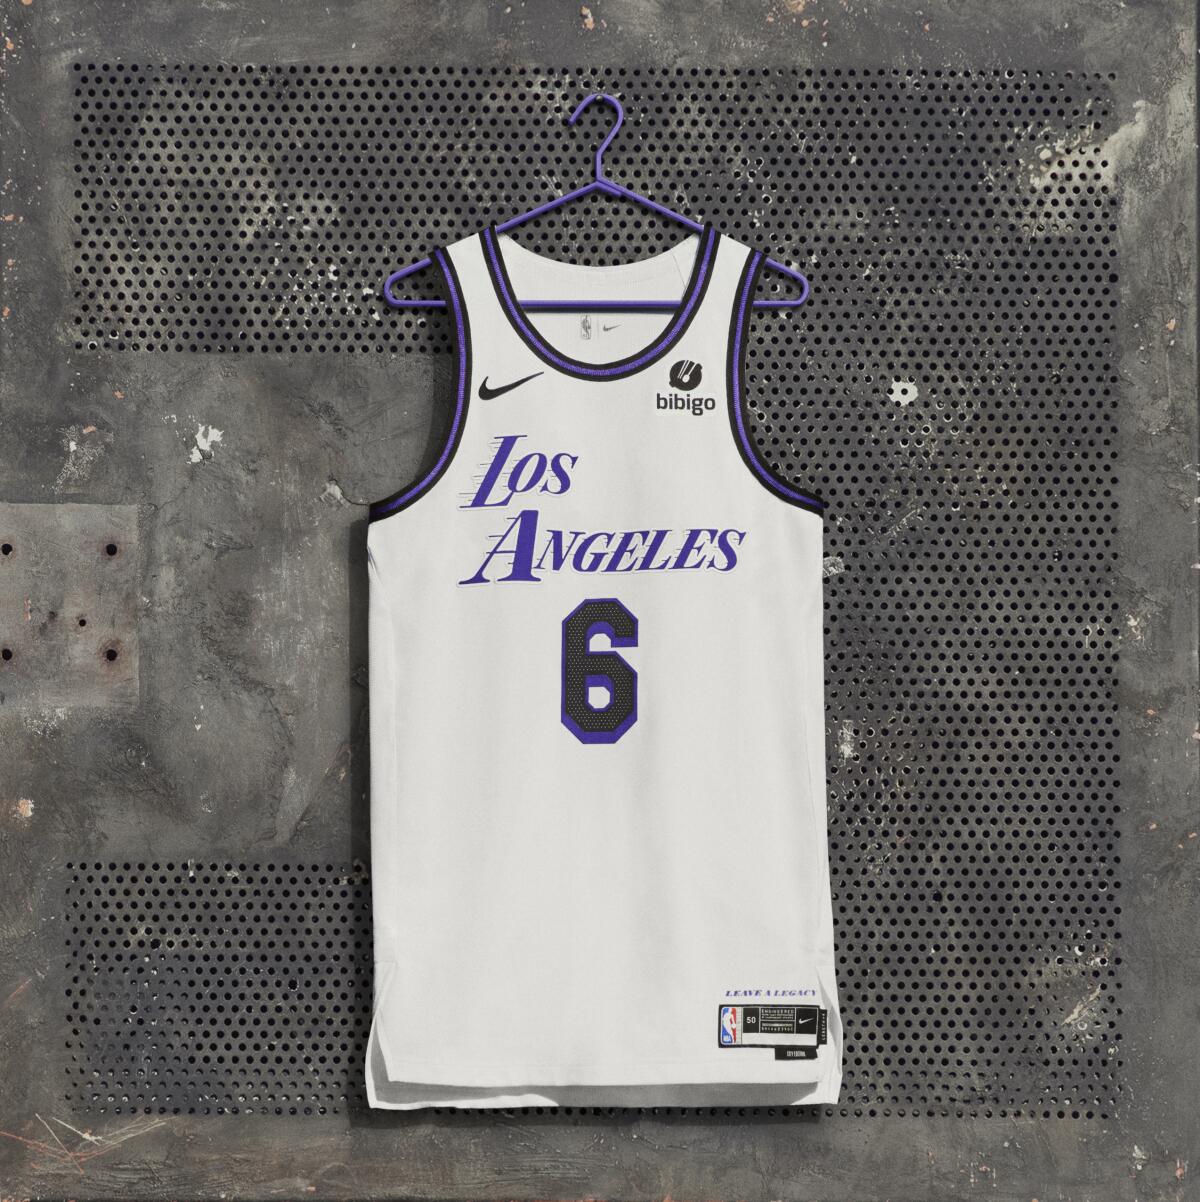 Lakers 2022-23 City Edition jersey